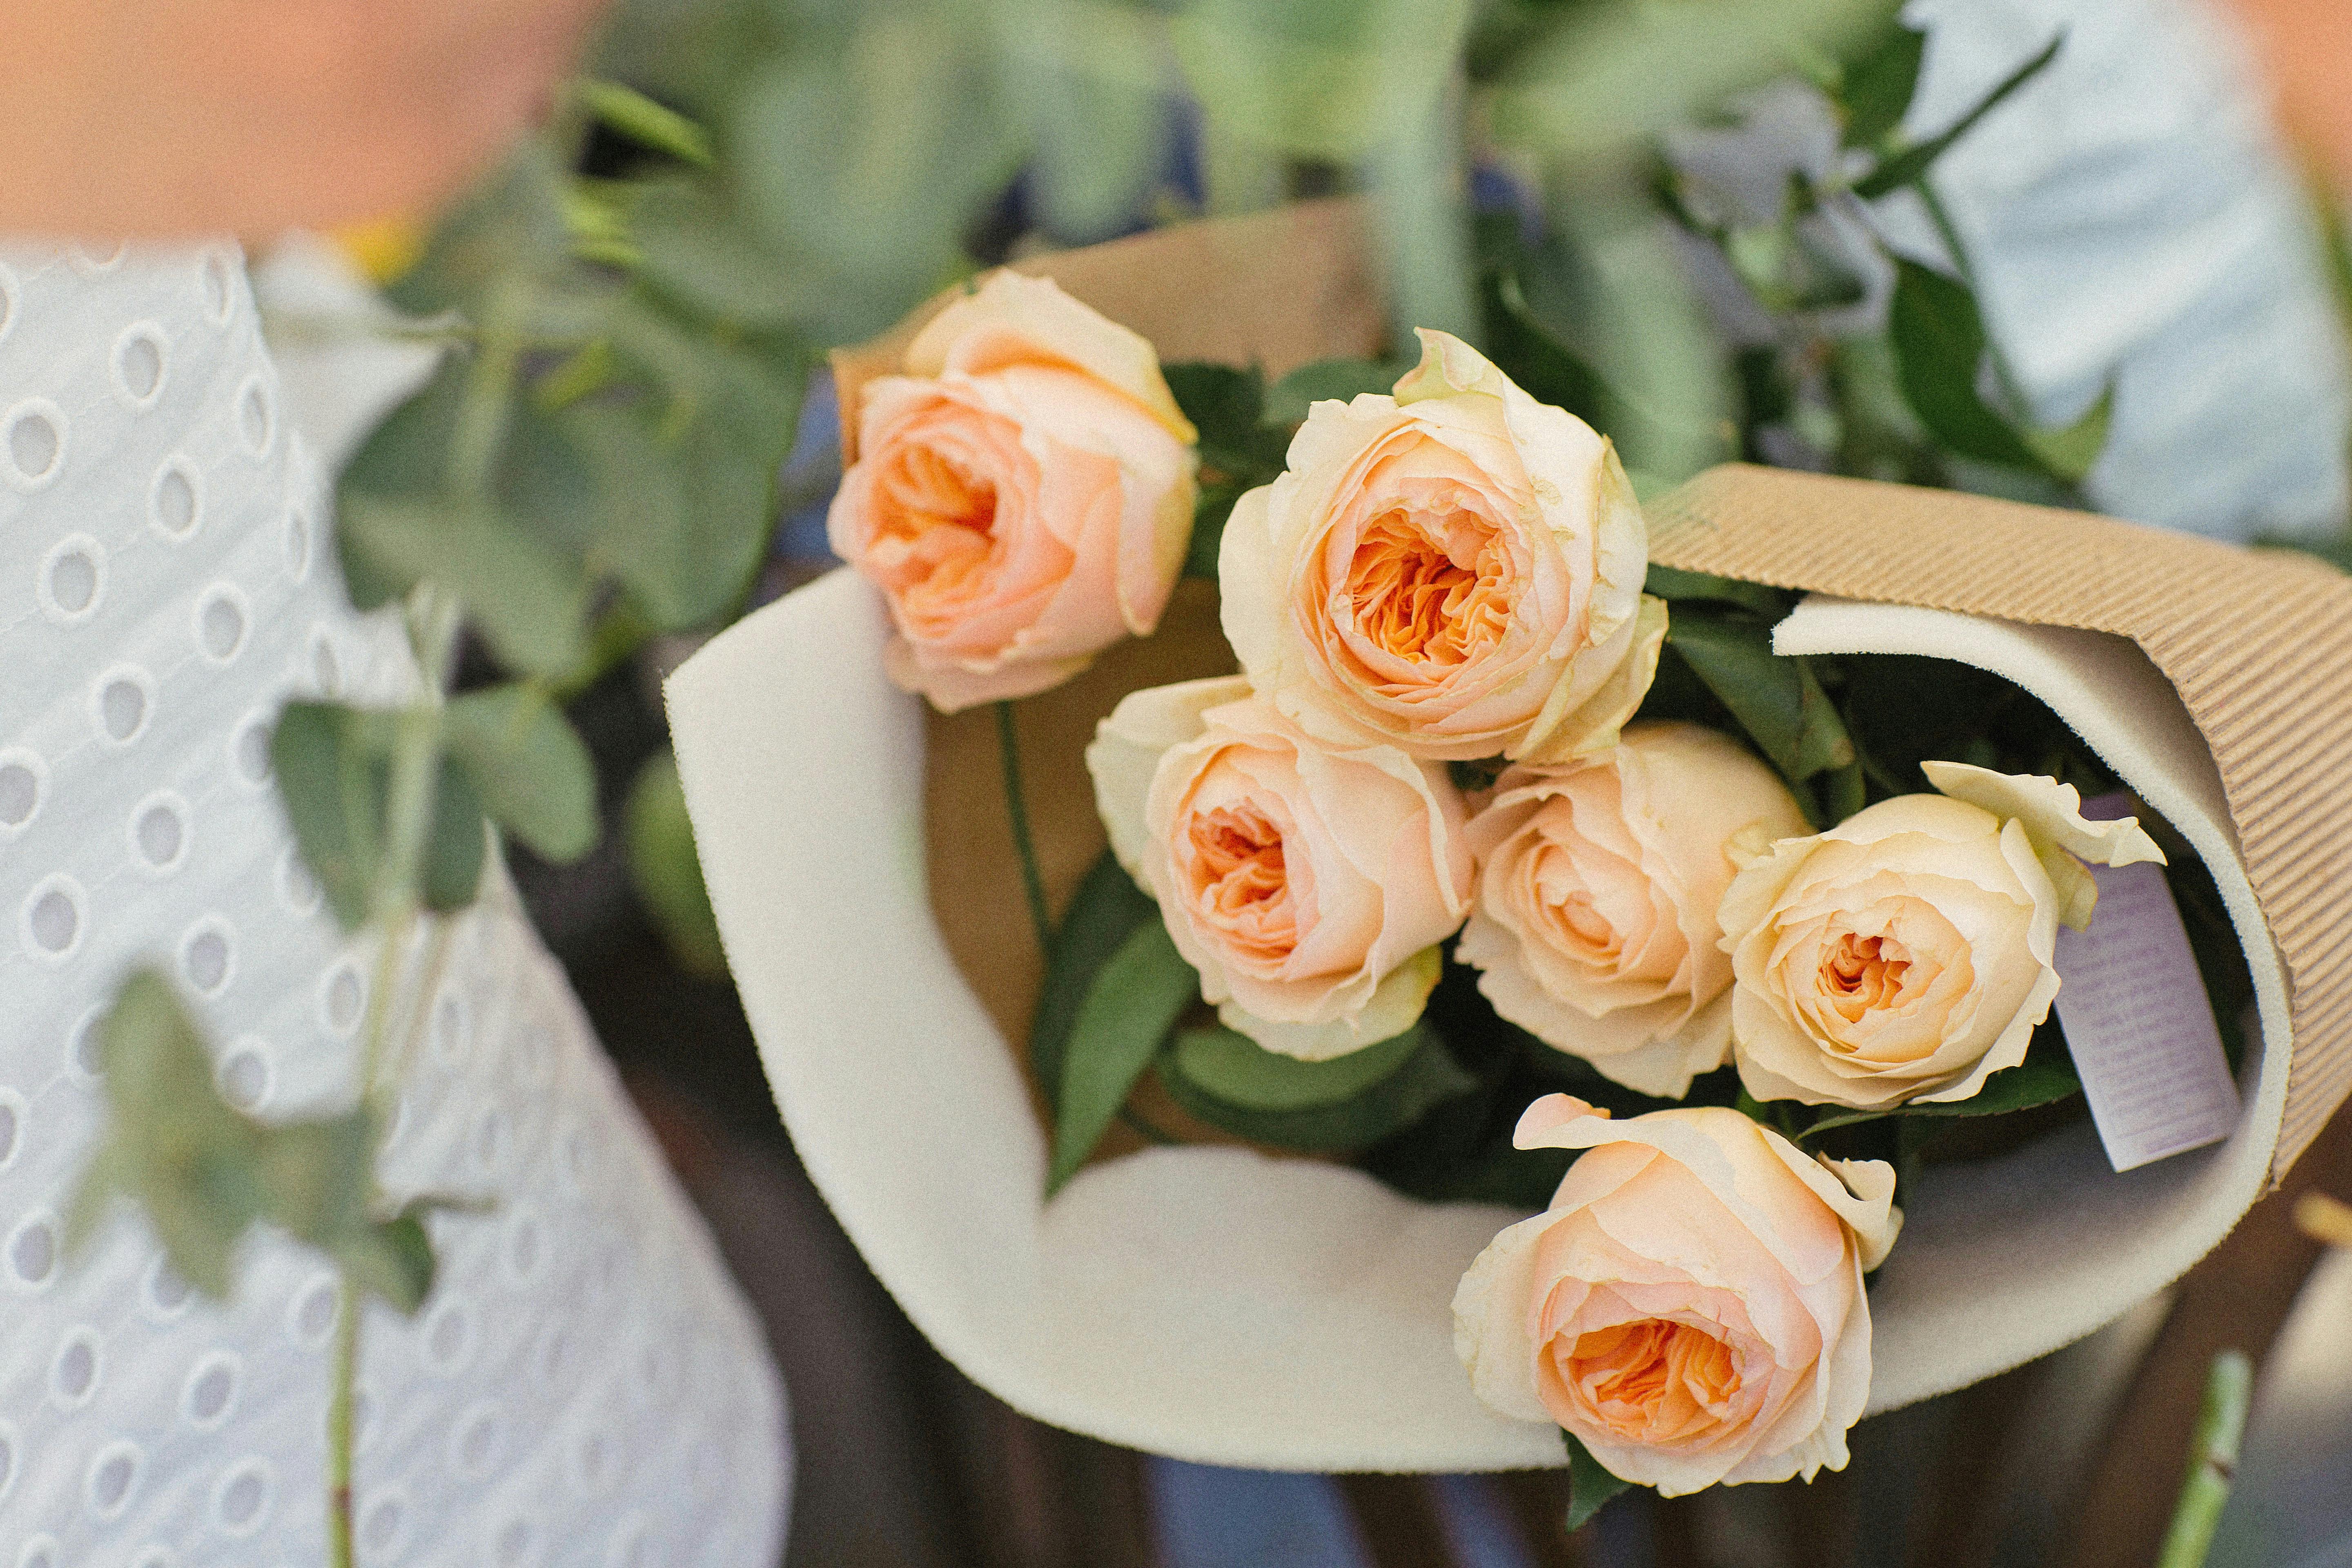 Rose bouquets wrapped in tissue paper - Stock Image - C053/7583 - Science  Photo Library